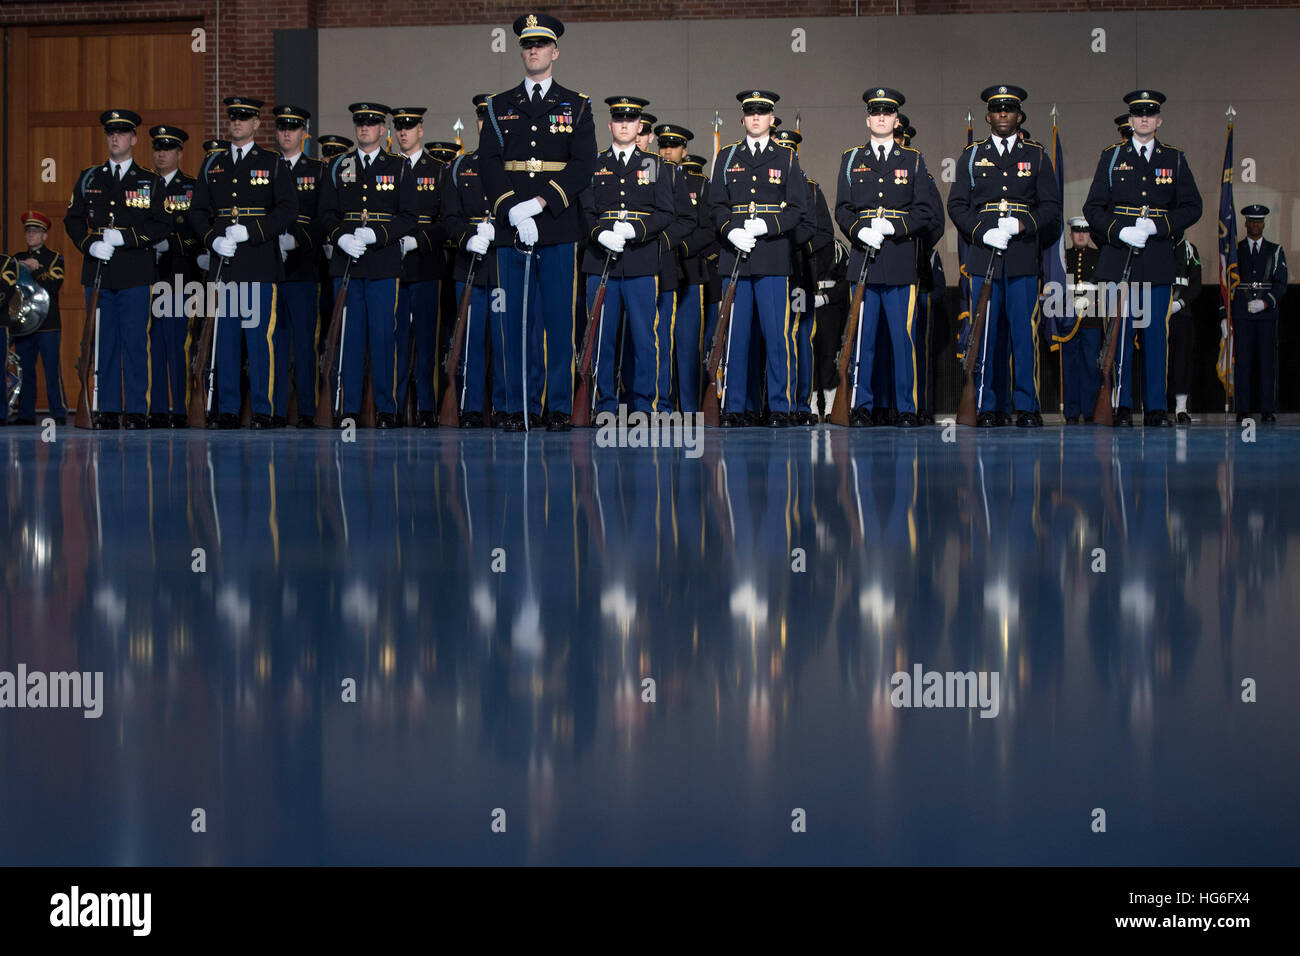 Joint Base Myers-Henderson Hall, Virginia, USA. 4th January, 2017.  An Army Honor Guard stands for United States President Barack Obama's Armed Forces Full Honor Review Farewell Ceremony at Joint Base Myers-Henderson Hall, in Virginia on January 4, 2017. The five braces of the military honored the president and vice-president for their service as they conclude their final term in office. Credit: MediaPunch Inc/Alamy Live News Stock Photo